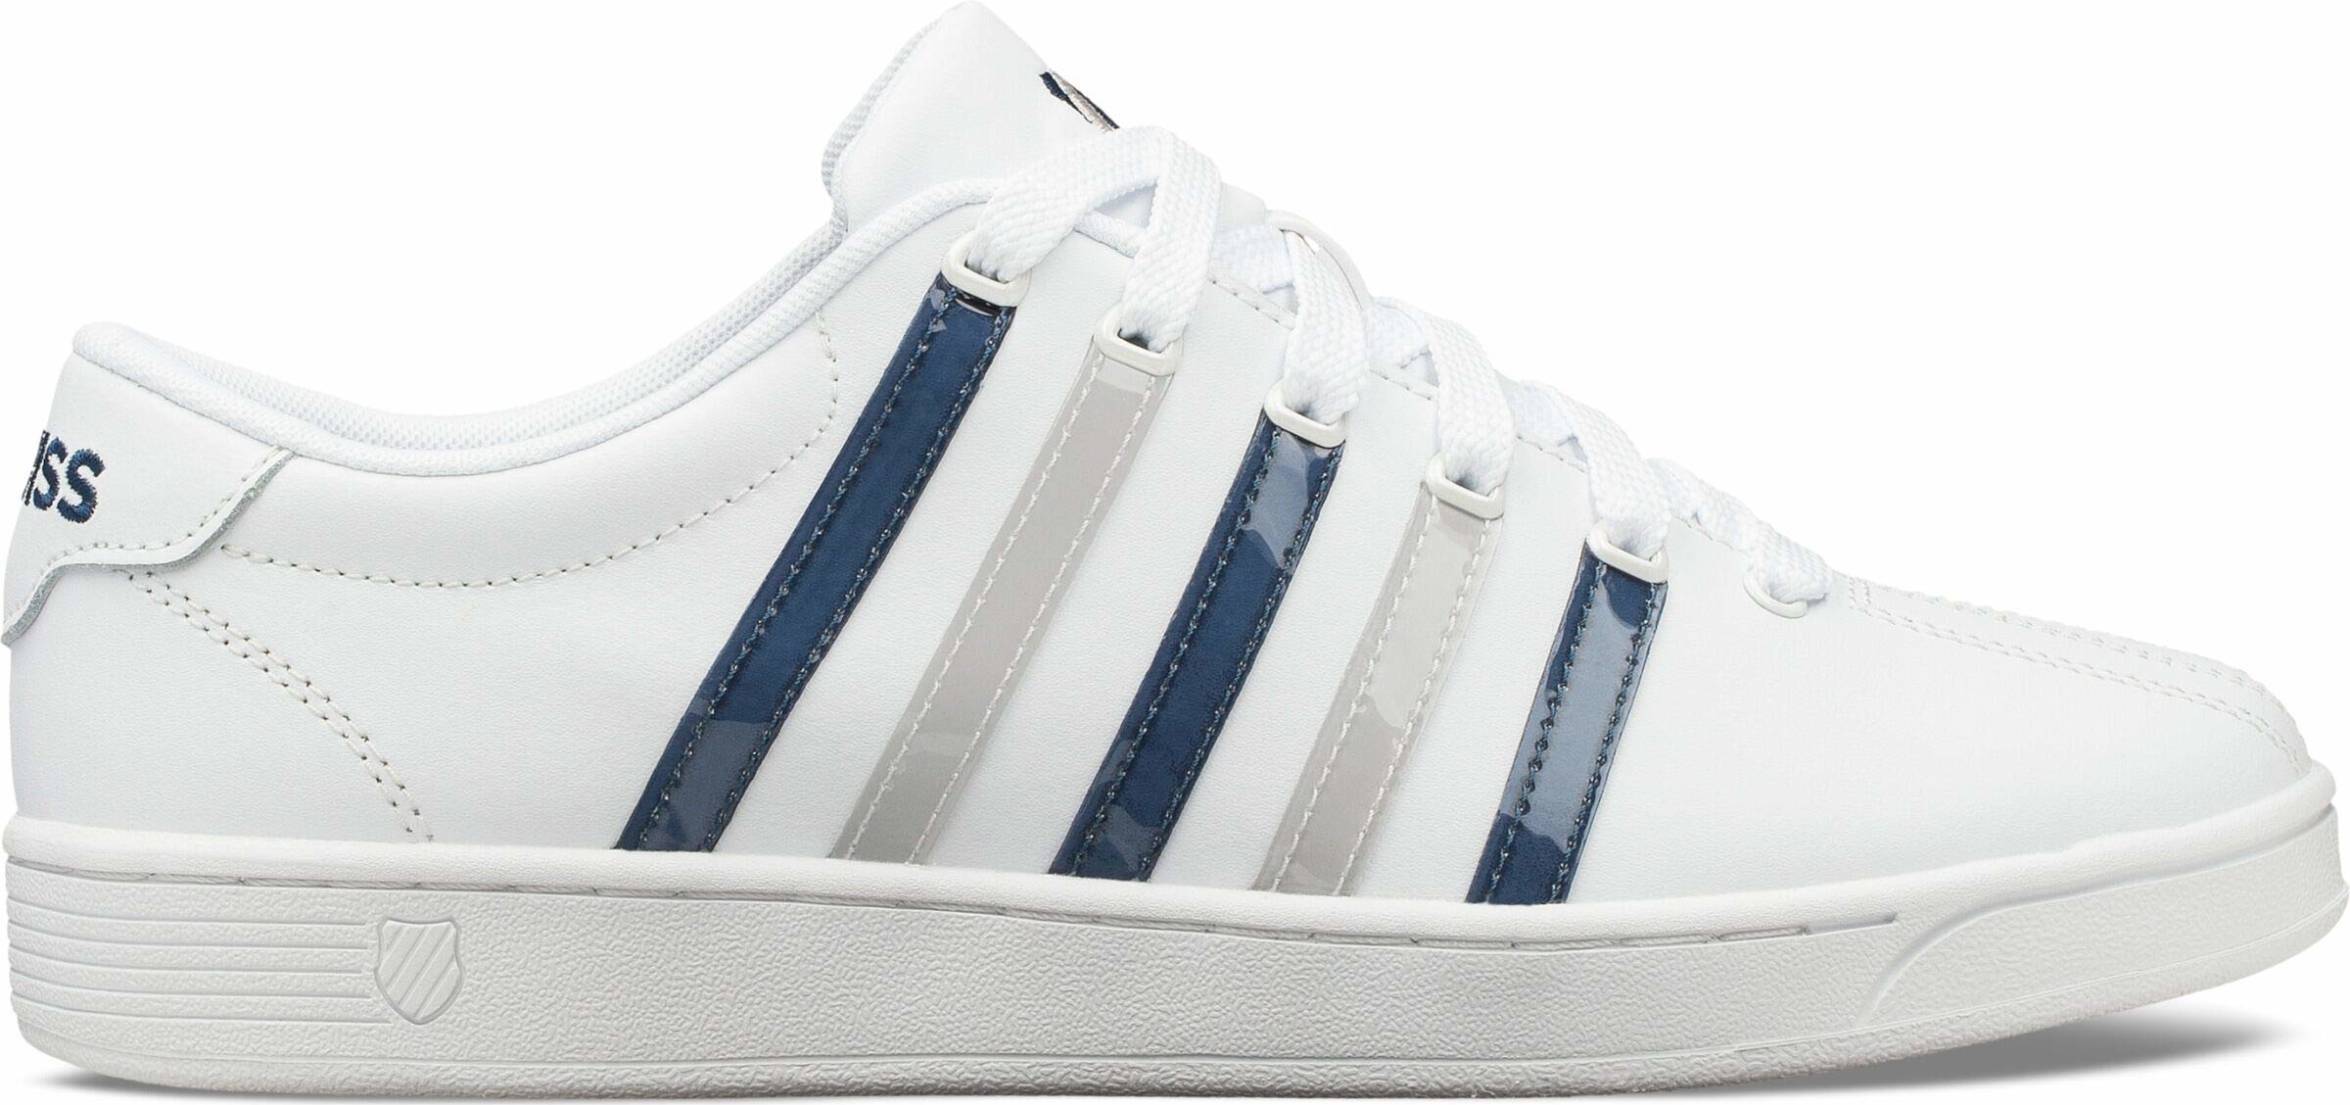 blue and white k swiss